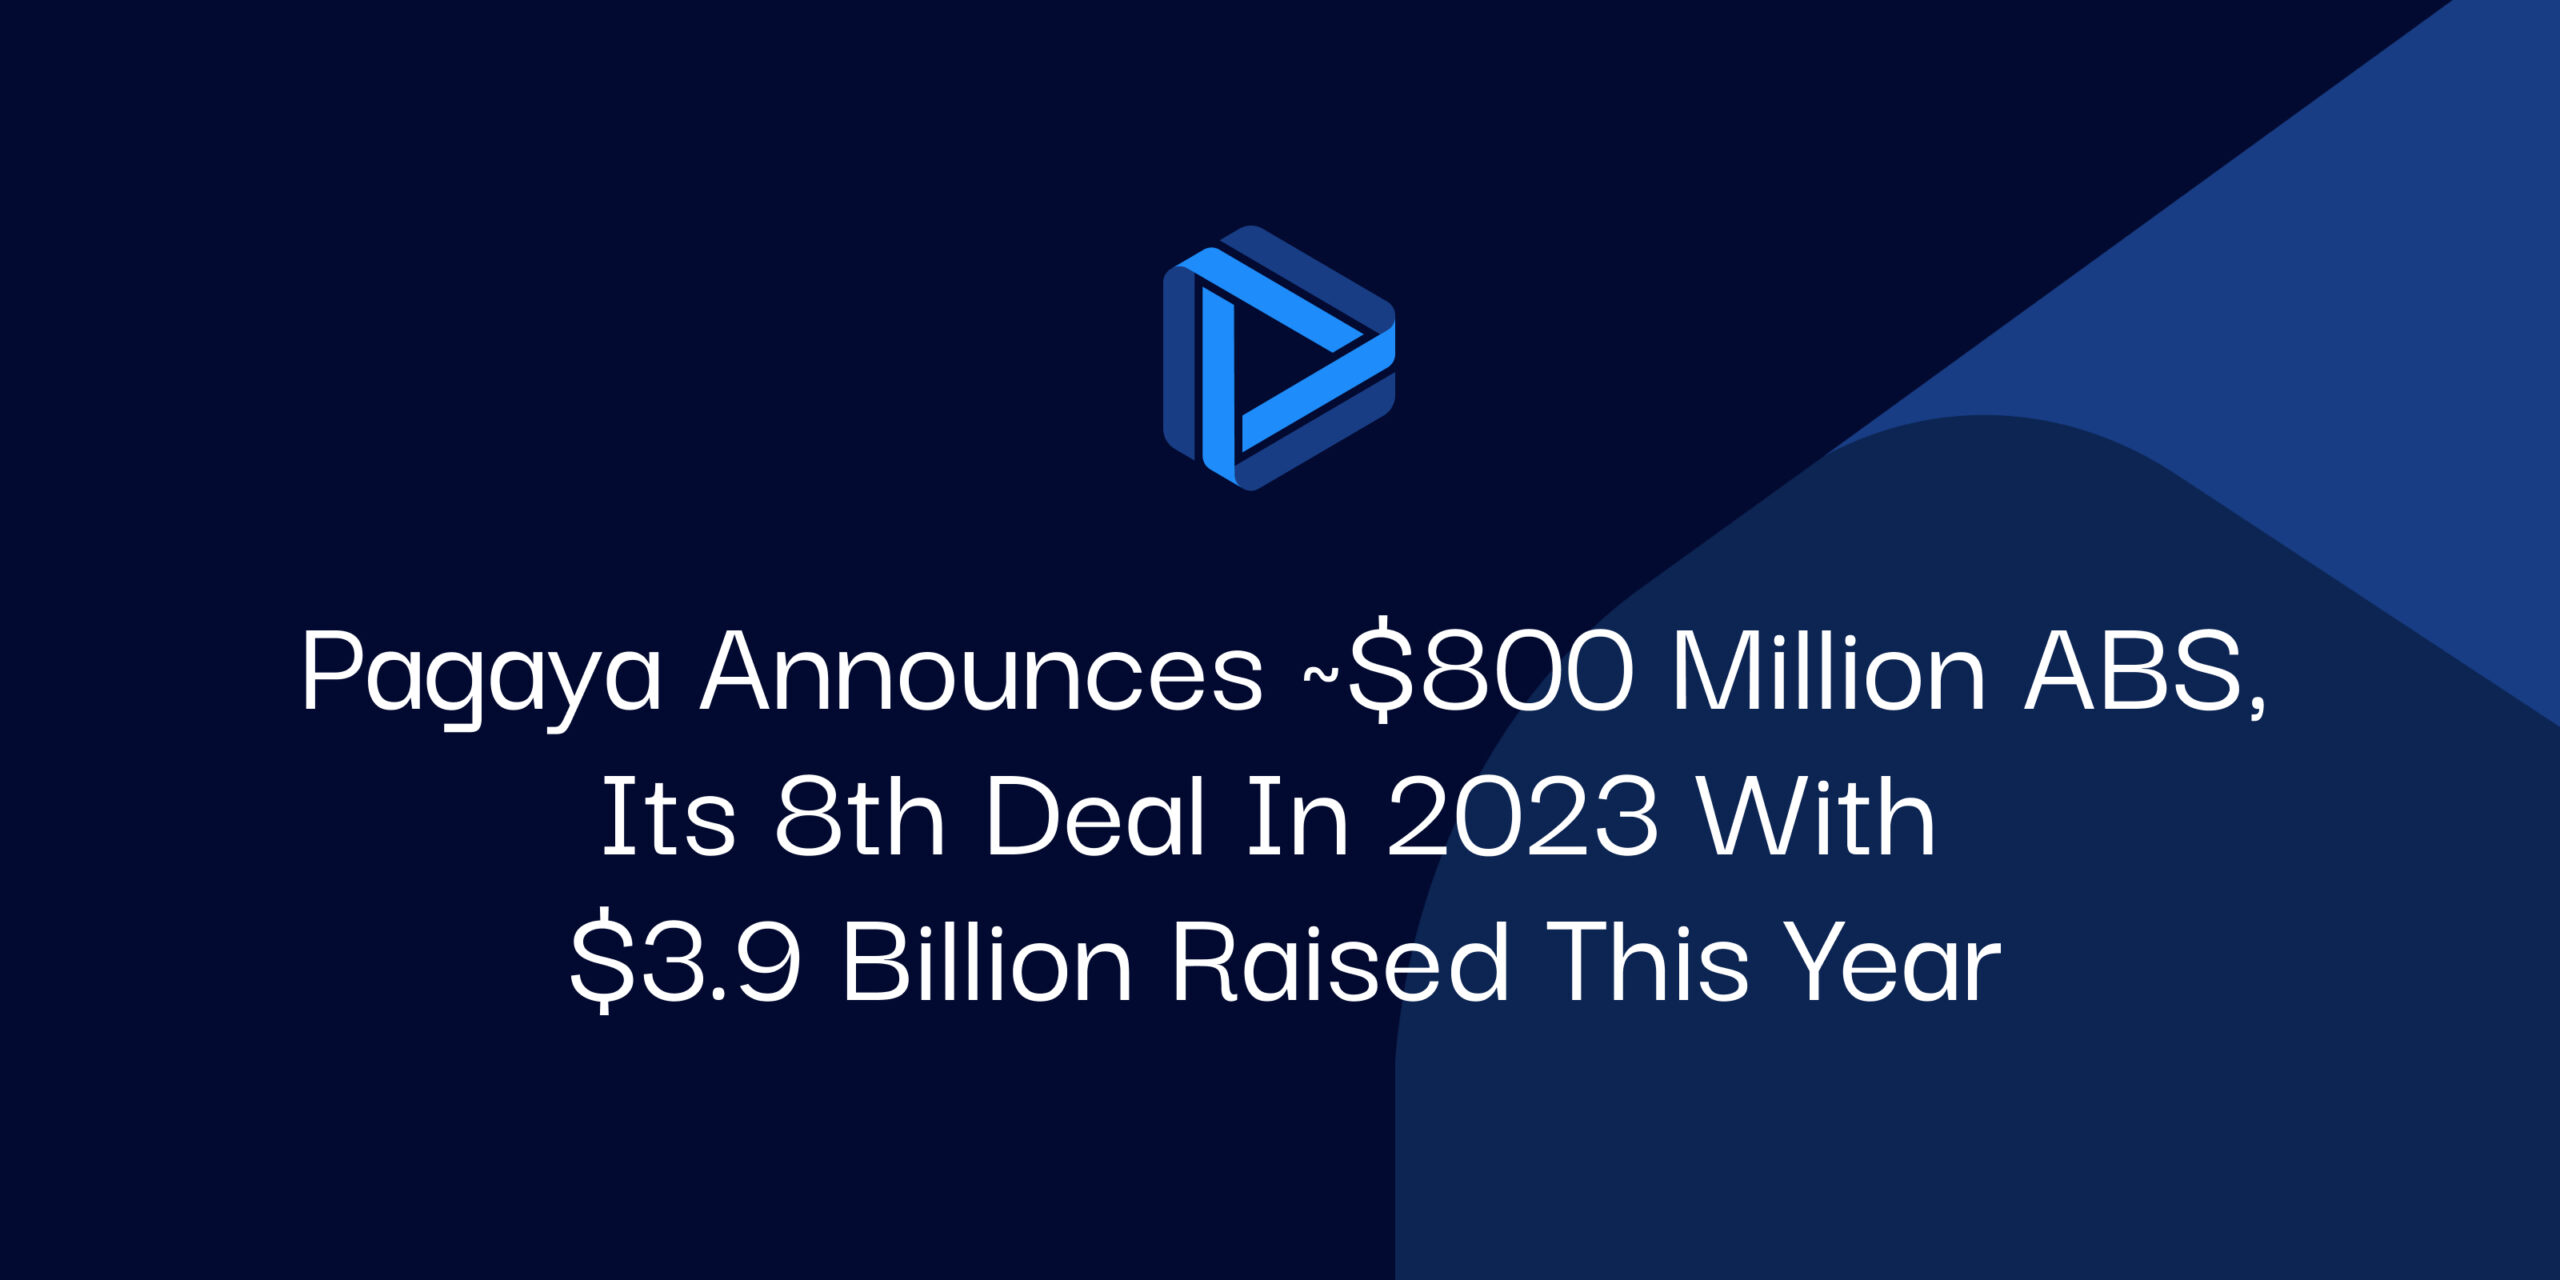 Pagaya Announces ~$800 Million ABS, its 8th Deal in 2023 with $3.9 Billion Raised This Year